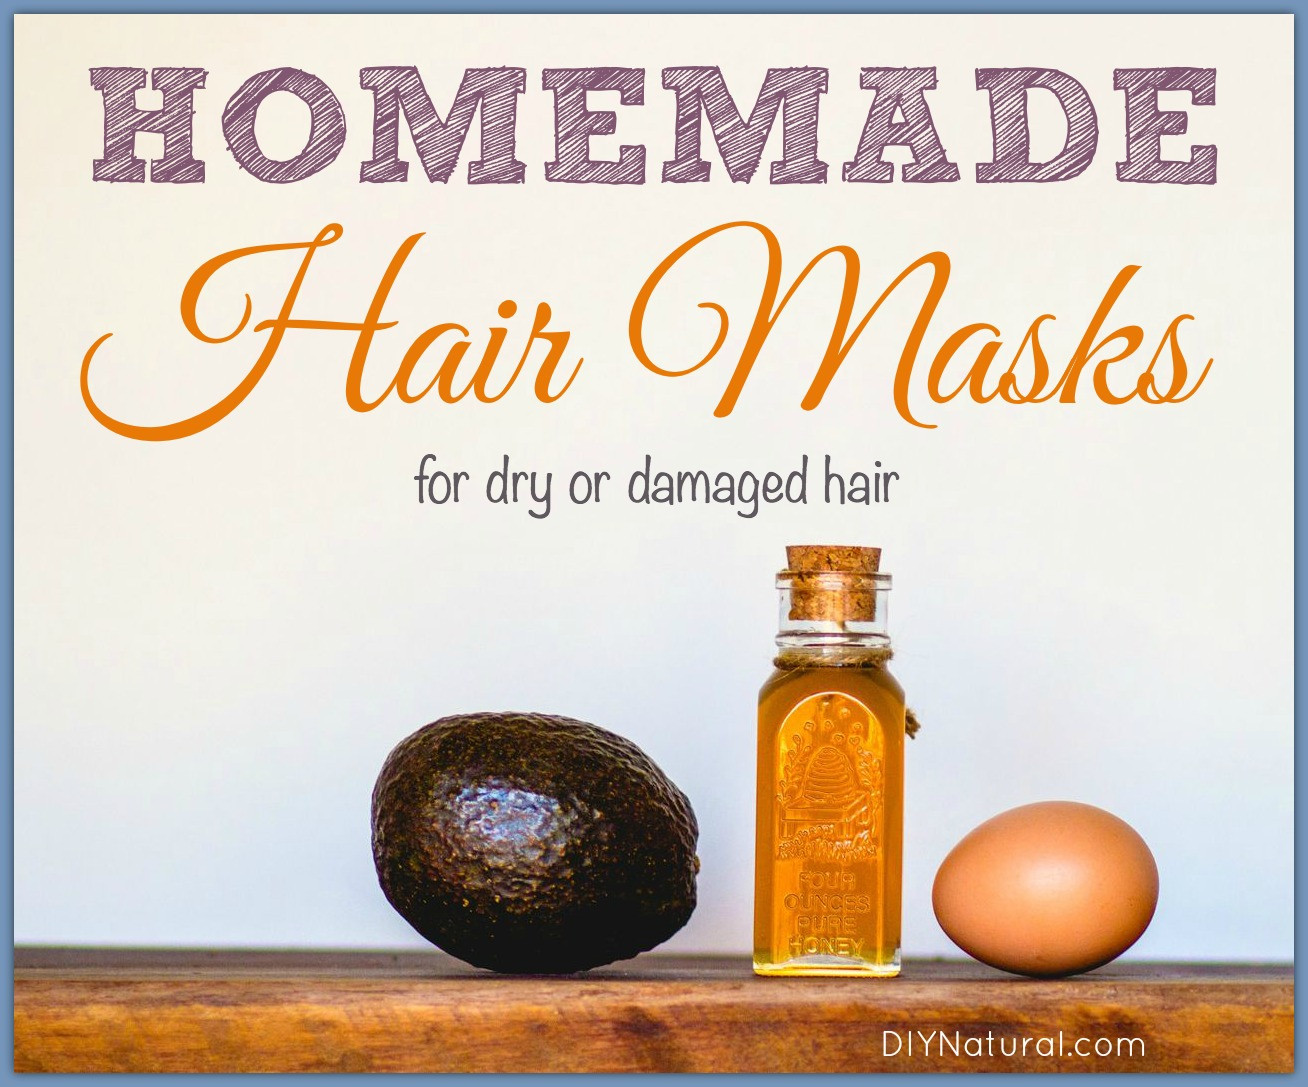 DIY Hair Mask For Dry Curly Hair
 Homemade Hair Mask Several Recipes for Dry or Damaged Hair